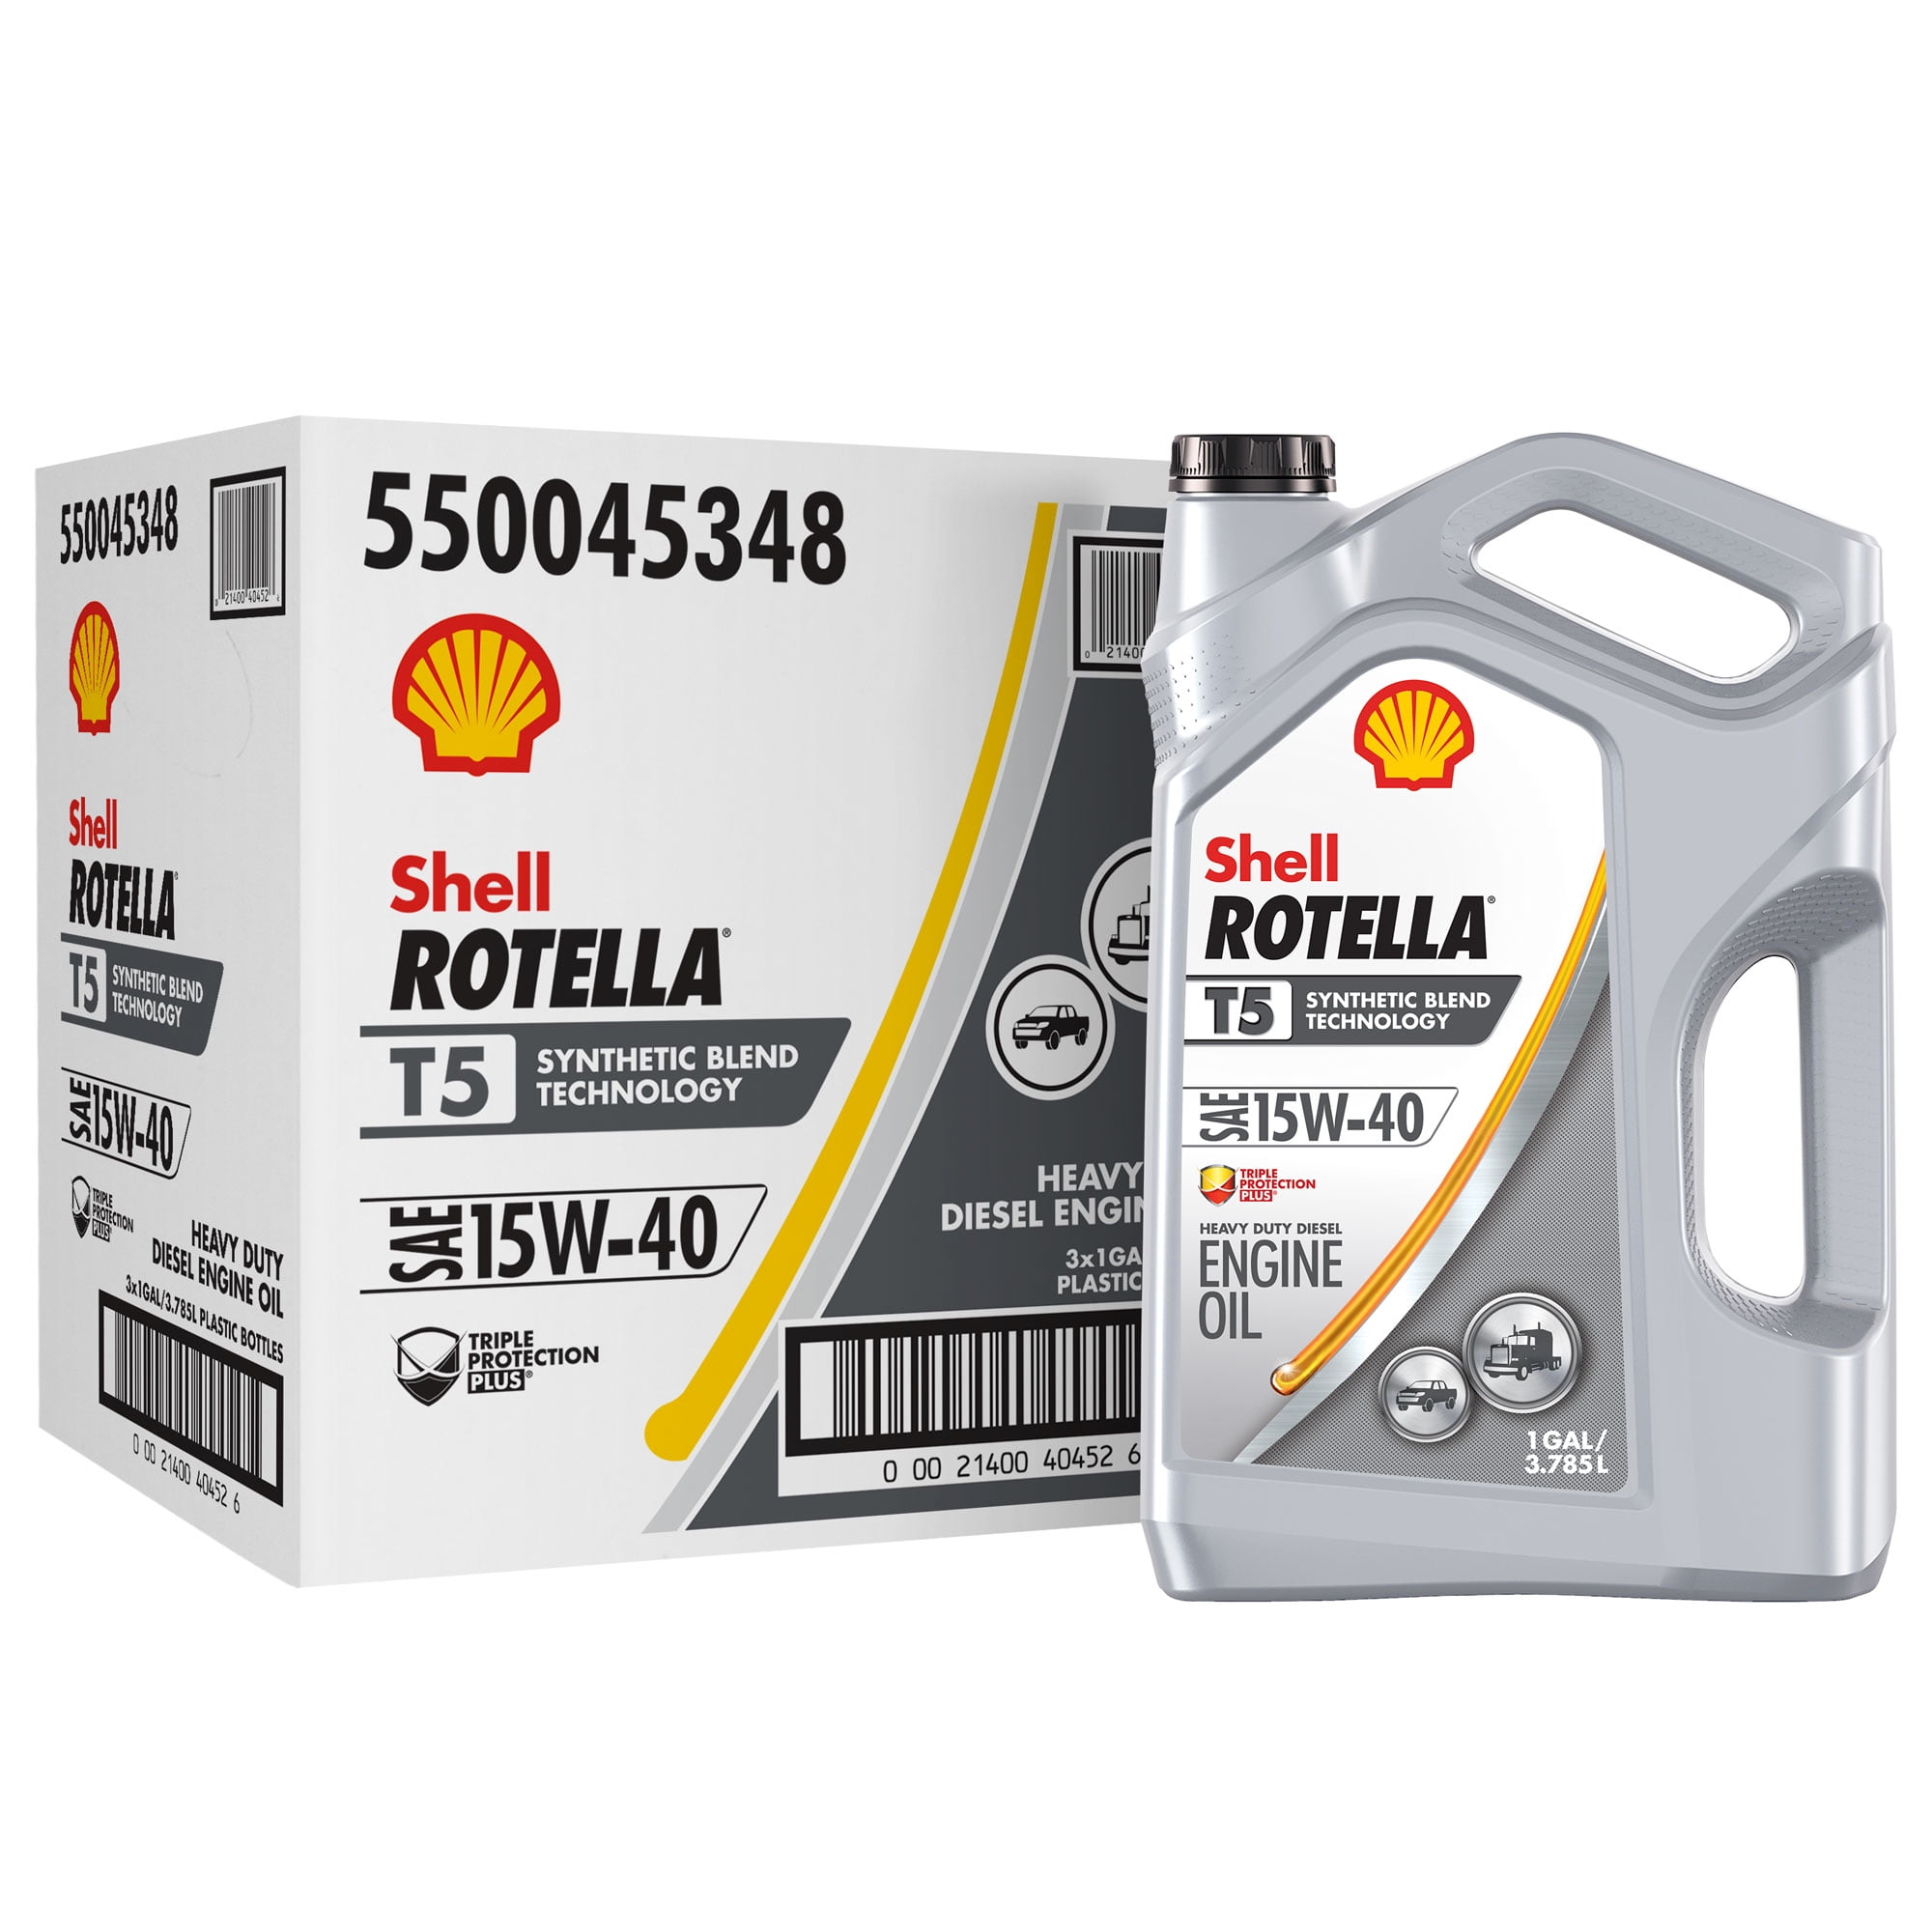  3 pack Shell Rotella T5 15W 40 Synthetic Blend Diesel Engine Oil 1 